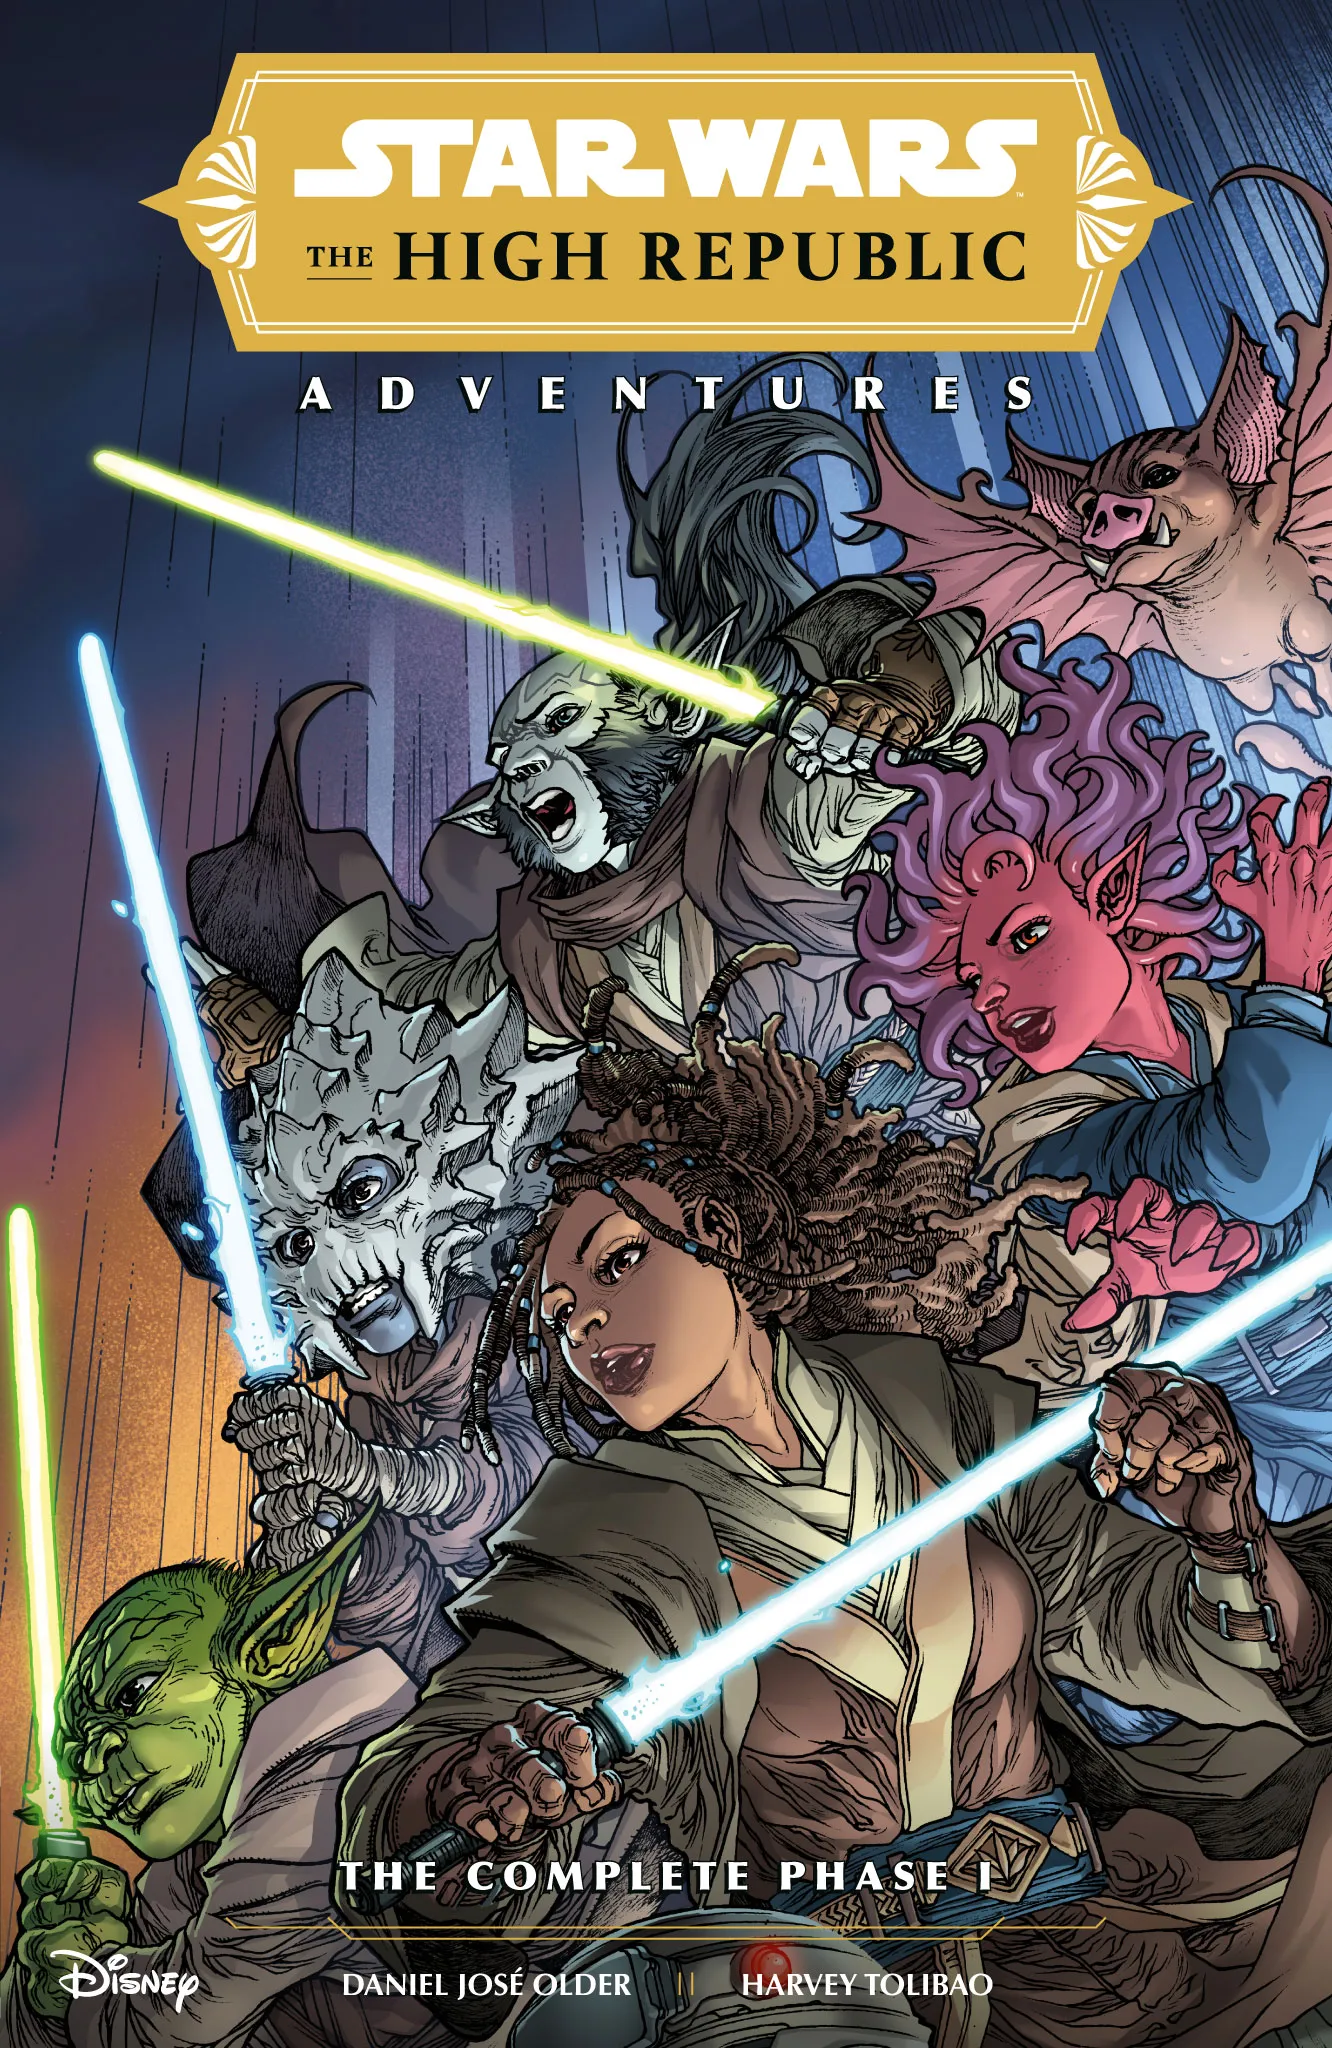 Star Wars: The High Republic Adventures - The Complete Phase 1 (Star Wars: The High Republic Adventures #1-3)